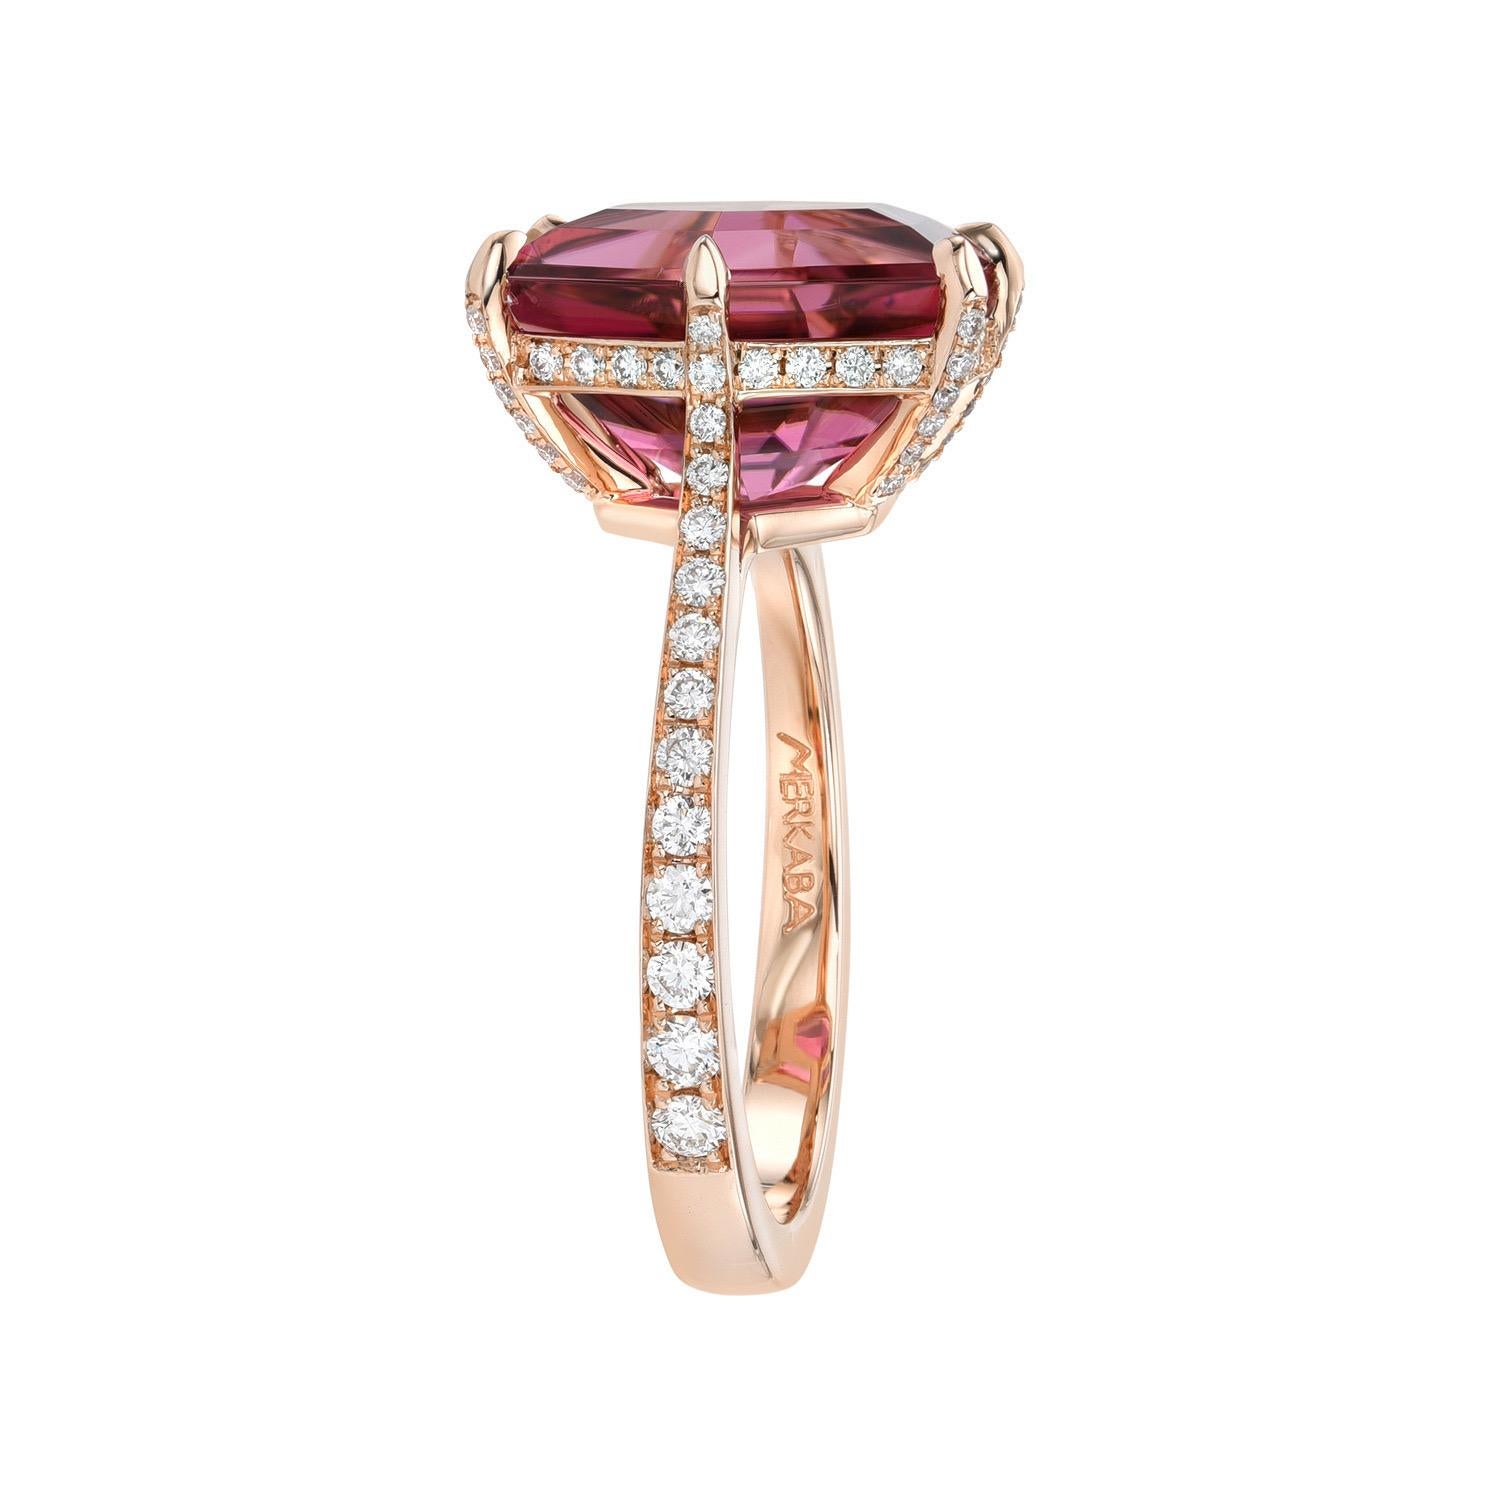 Sensational one-of-a-kind 5.50 carat Pink Tourmaline Hexagon, 18K rose gold ring, decorated with a total of 0.46 carat round brilliant collection diamonds.
Ring size 6.5. Resizing is complementary upon request.
Crafted by extremely skilled hands in